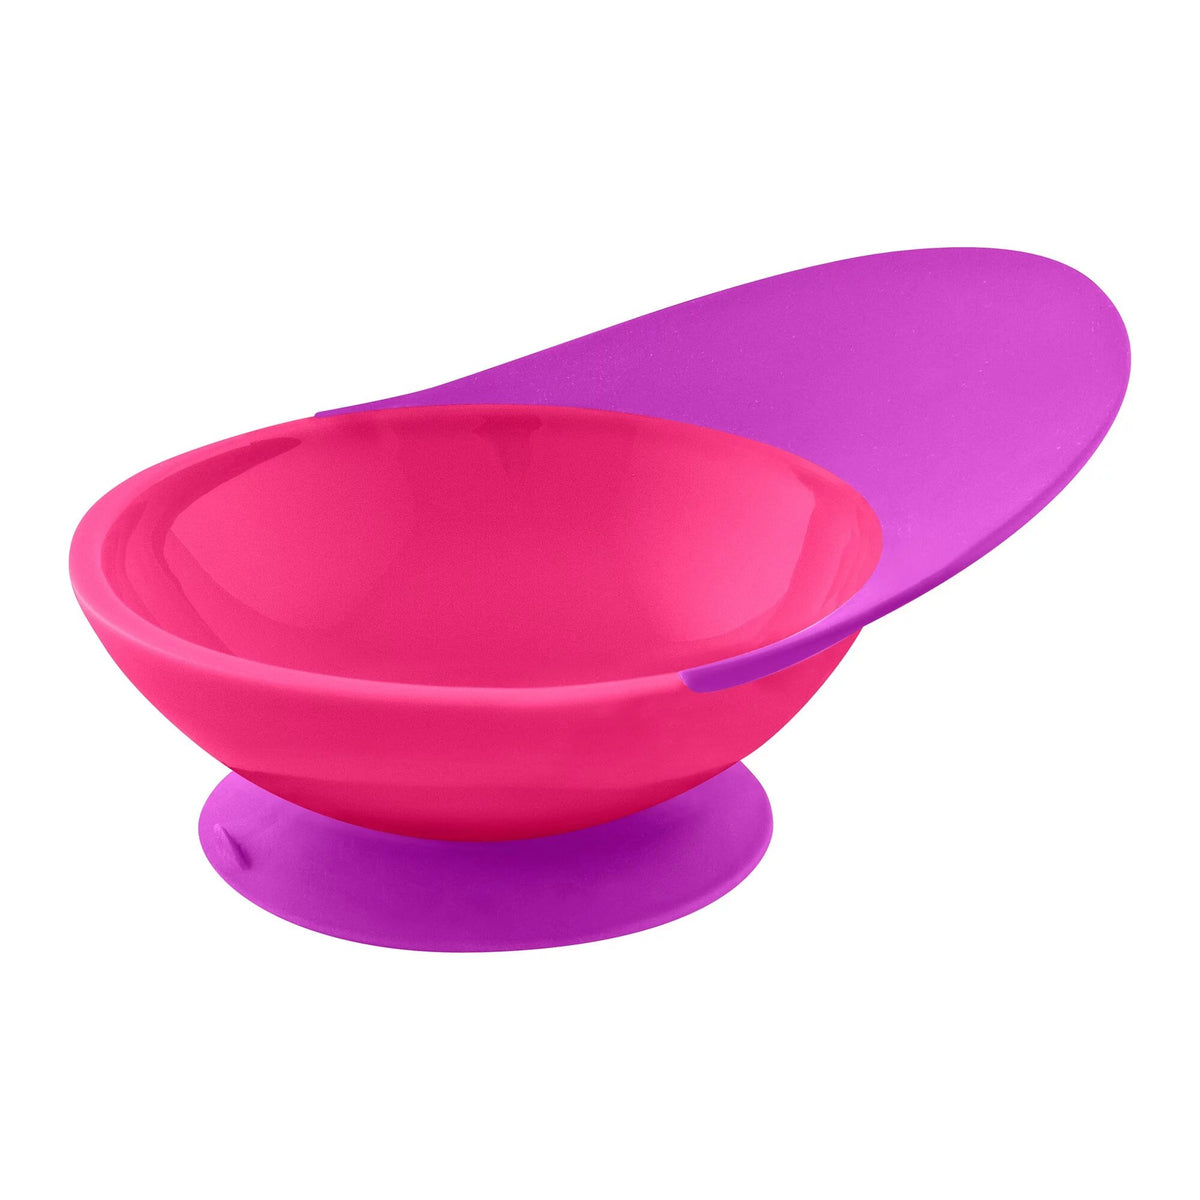 boon-catch-bowl-with-spill-catcher-pink- (1)